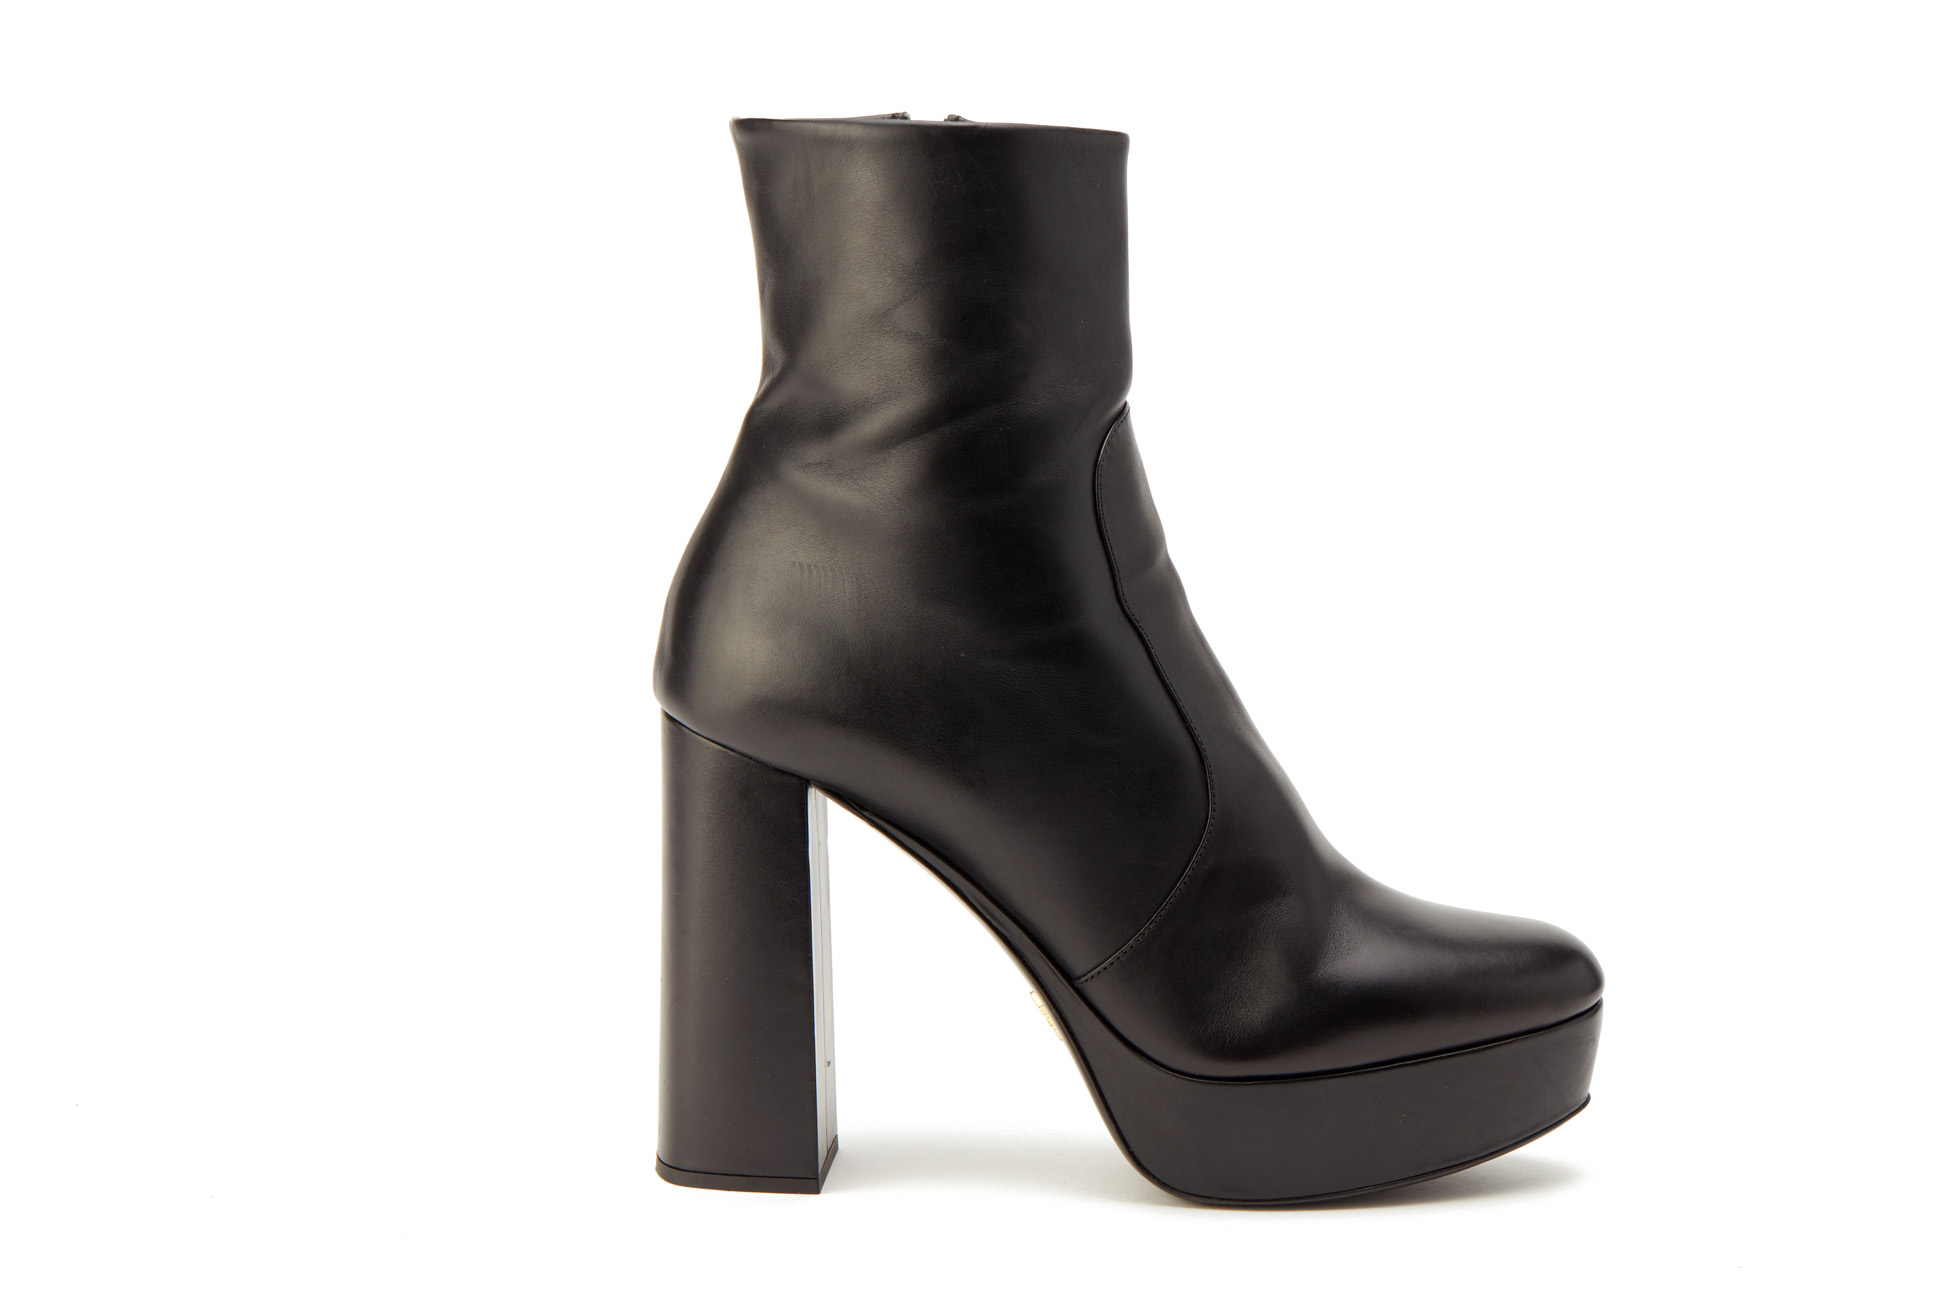 A PAIR OF PRADA BLACK LEATHER ANKLE BOOTIES EU 41 - Image 2 of 4